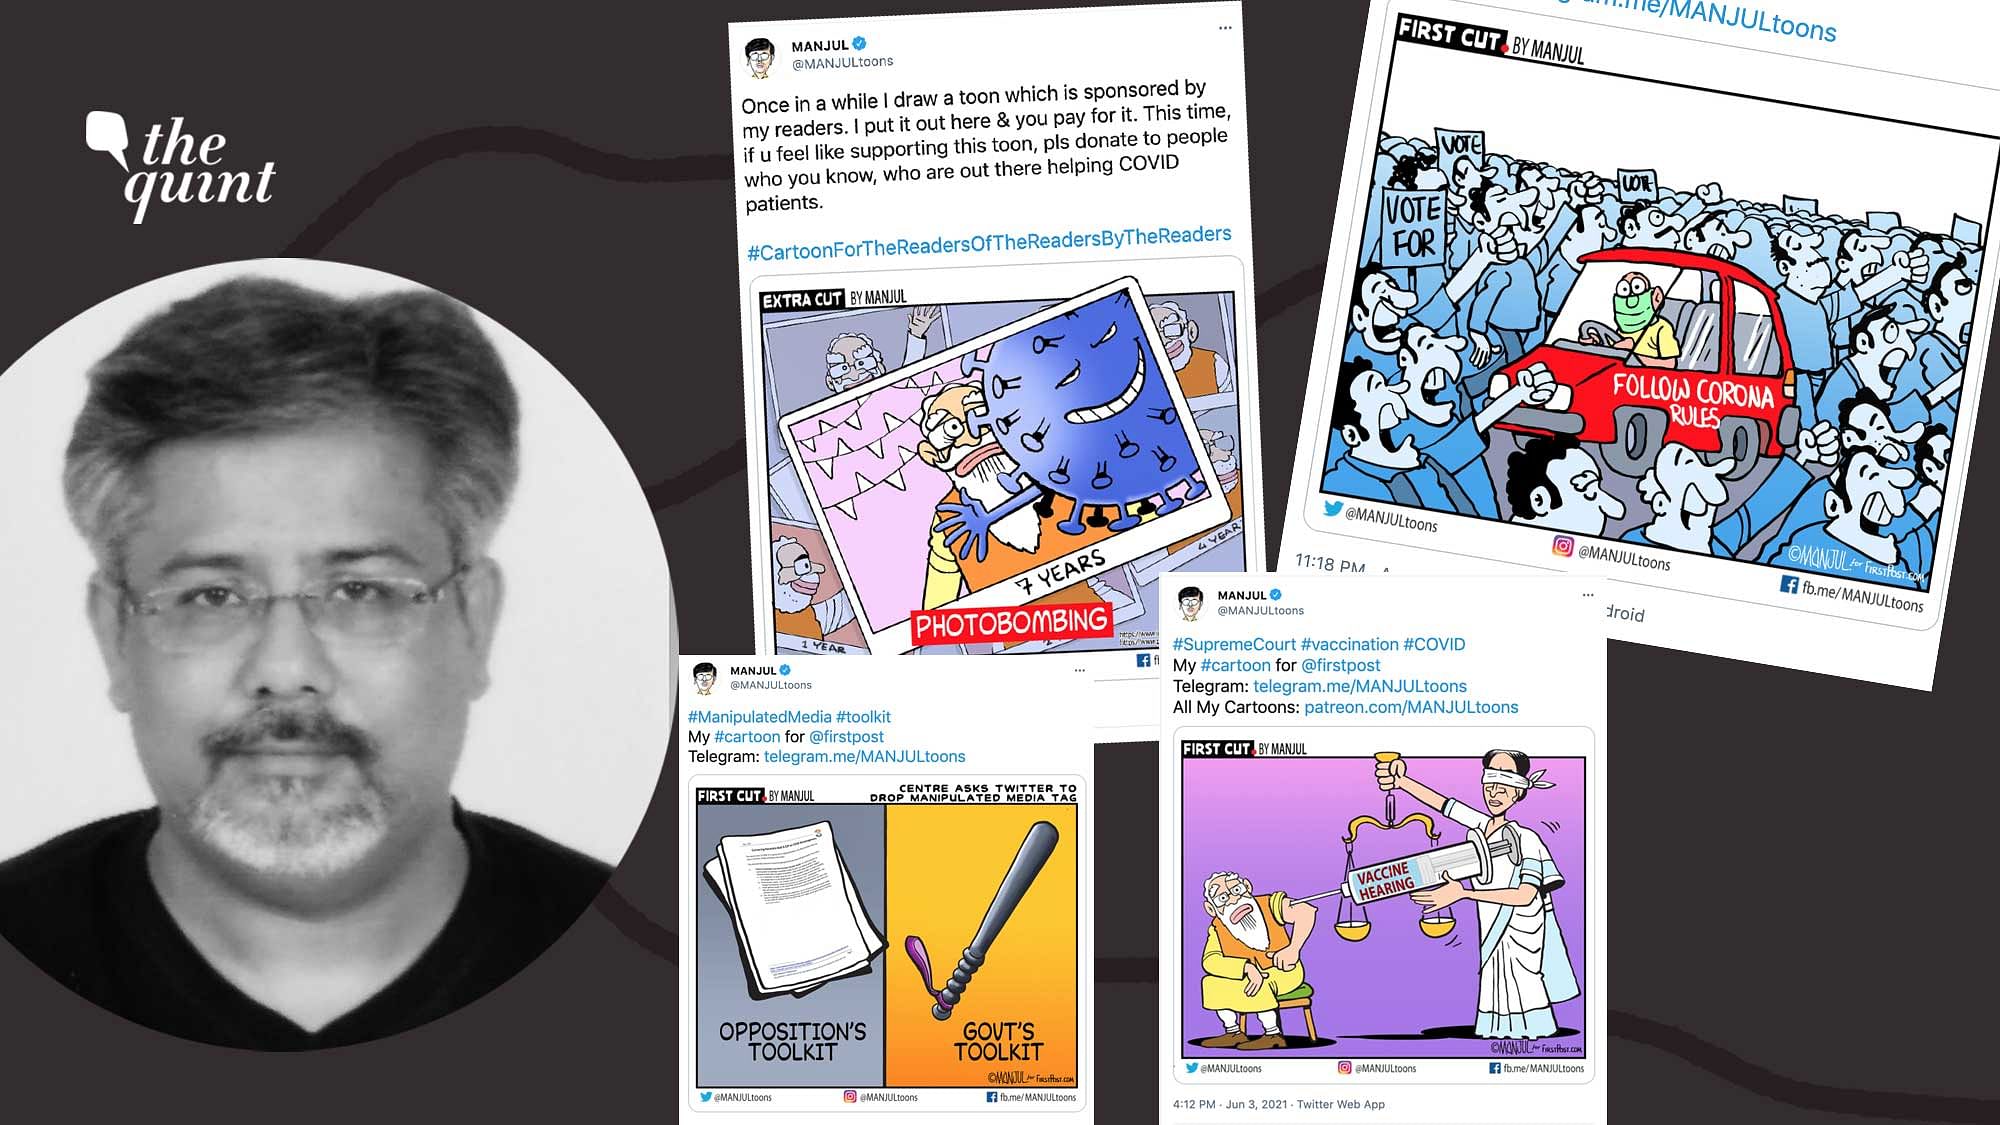 Cartoonist Manjul said it would have been good if the government mentioned which tweet of his had caused a problem.